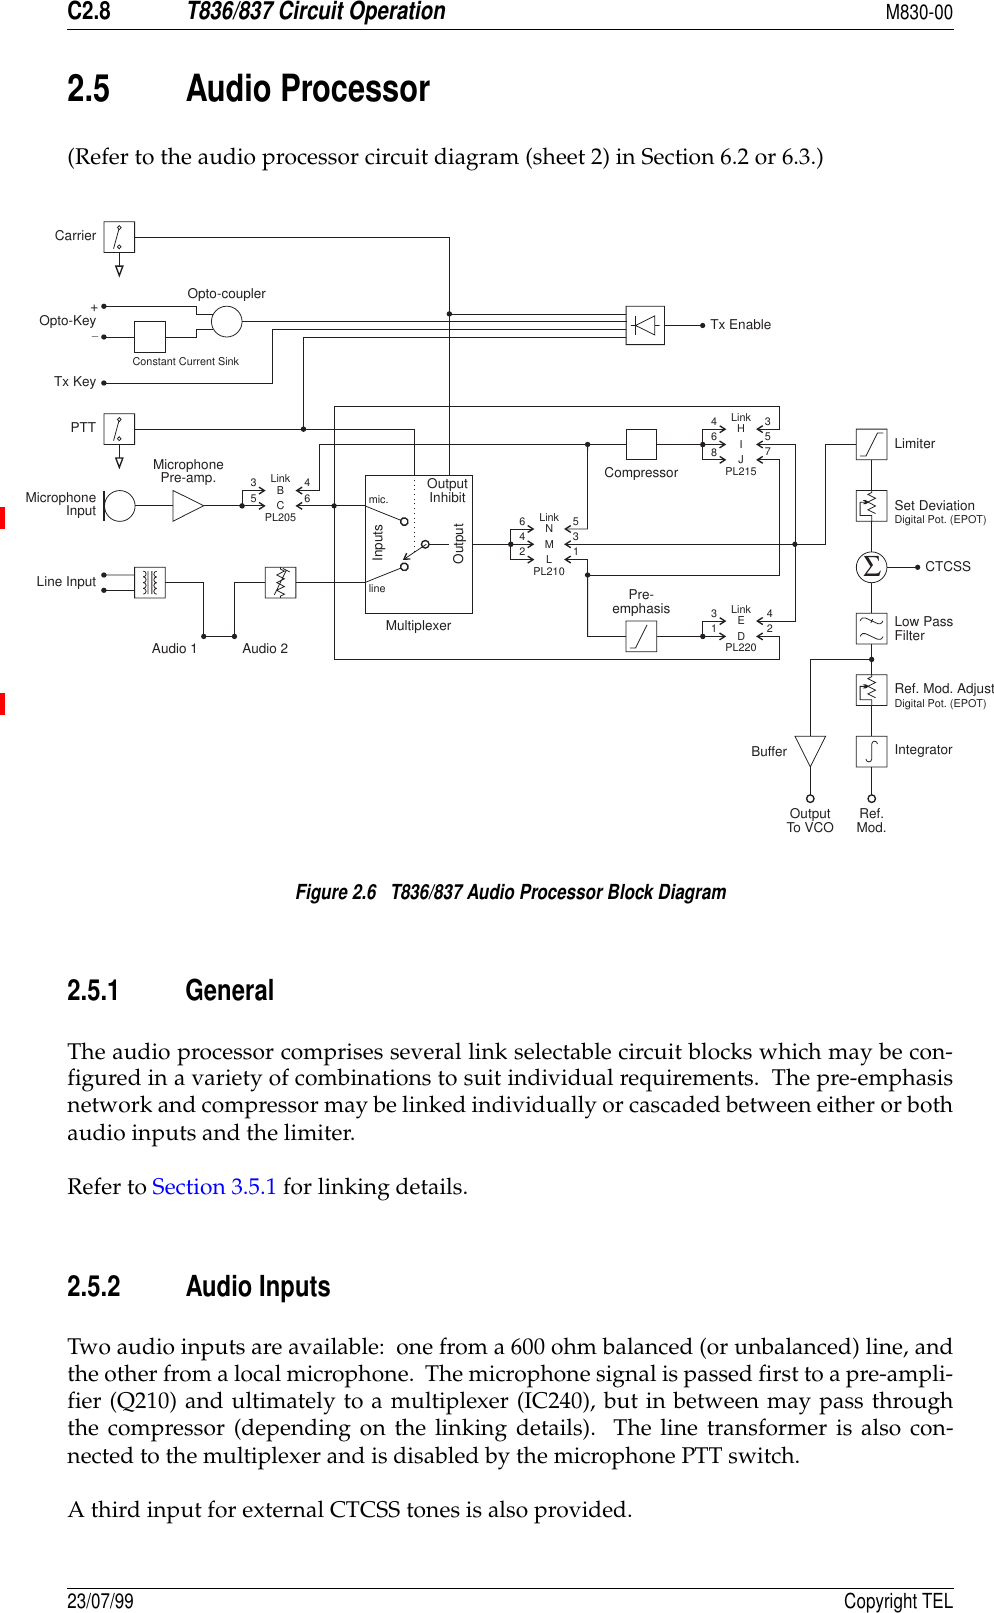 C2.8T836/837 Circuit OperationM830-0023/07/99 Copyright TEL2.5 Audio Processor(Refer to the audio processor circuit diagram (sheet 2) in Section 6.2 or 6.3.)Figure 2.6   T836/837 Audio Processor Block Diagram2.5.1 GeneralThe audio processor comprises several link selectable circuit blocks which may be con-figured in a variety of combinations to suit individual requirements.  The pre-emphasisnetwork and compressor may be linked individually or cascaded between either or bothaudio inputs and the limiter.Refer to Section 3.5.1 for linking details.2.5.2 Audio InputsTwo audio inputs are available:  one from a 600 ohm balanced (or unbalanced) line, andthe other from a local microphone.  The microphone signal is passed first to a pre-ampli-fier (Q210) and ultimately to a multiplexer (IC240), but in between may pass throughthe compressor (depending on the linking details).  The line transformer is also con-nected to the multiplexer and is disabled by the microphone PTT switch.A third input for external CTCSS tones is also provided.Pre-emphasis346BC56434253357128NHMIELJD461mic.lineMultiplexerInputsOutputOutputInhibitAudio 1 Audio 2CompressorLinkLinkLinkTx EnableΣCarrierOpto-KeyTx KeyPTTMicrophoneInputLine InputMicrophonePre-amp.Opto-couplerLinkPL205PL215PL220PL210LimiterSet DeviationCTCSSLow PassFilterRef. Mod. AdjustIntegratorDigital Pot. (EPOT)Digital Pot. (EPOT)BufferOutputTo VCO Ref.Mod.Constant Current Sink+_